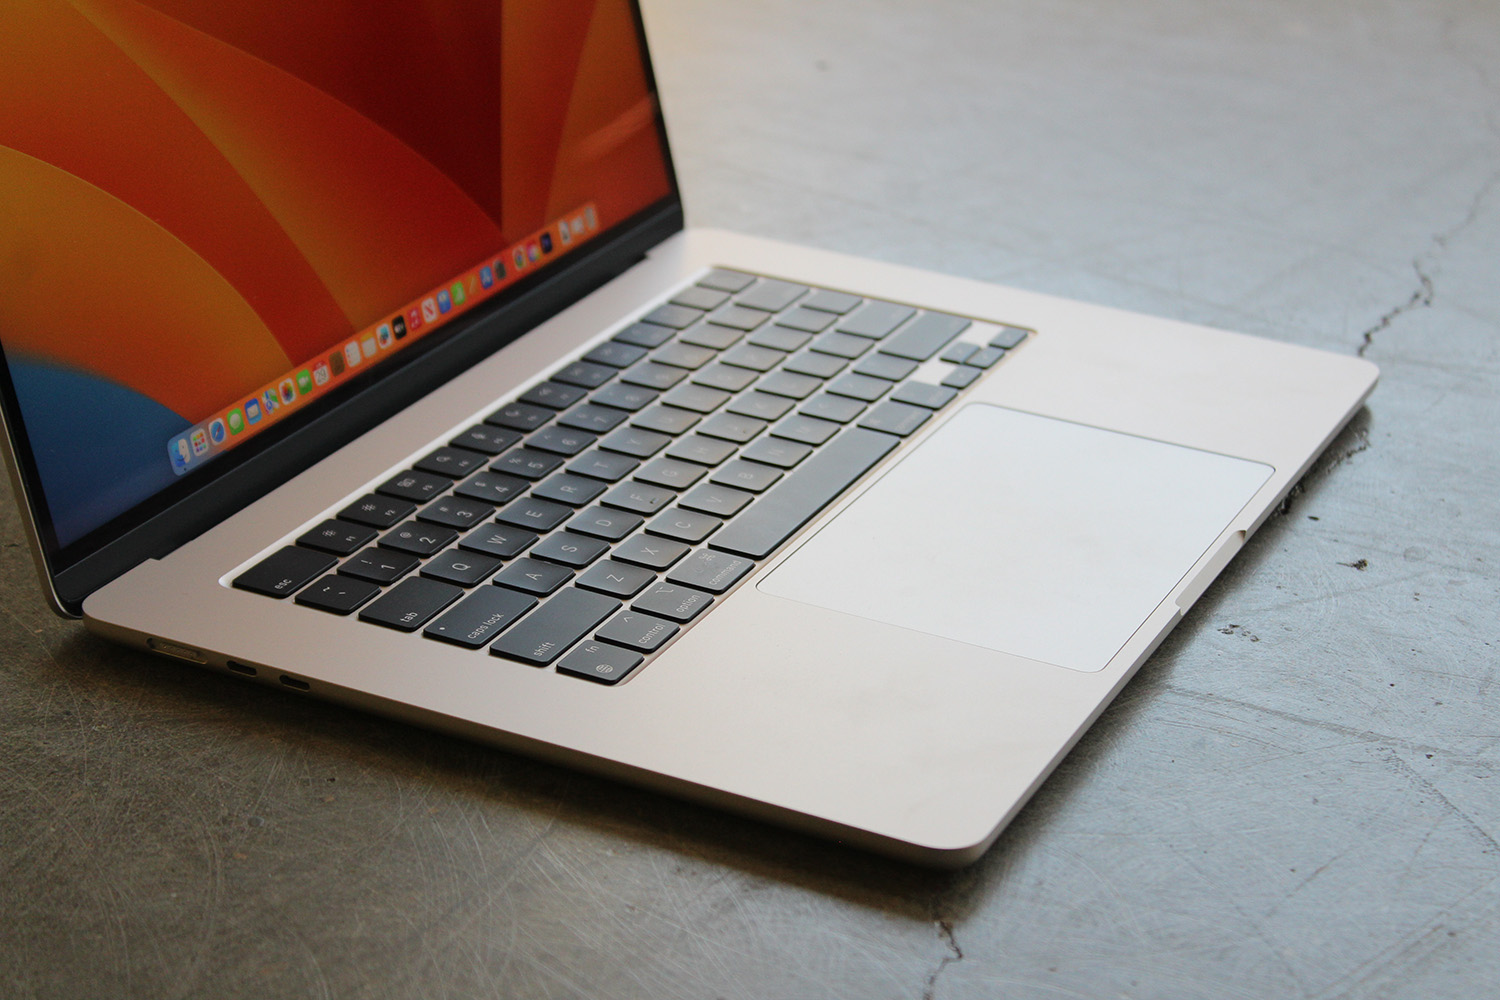 Apple MacBook Air 15-inch review: it's not what you think | Digital Trends